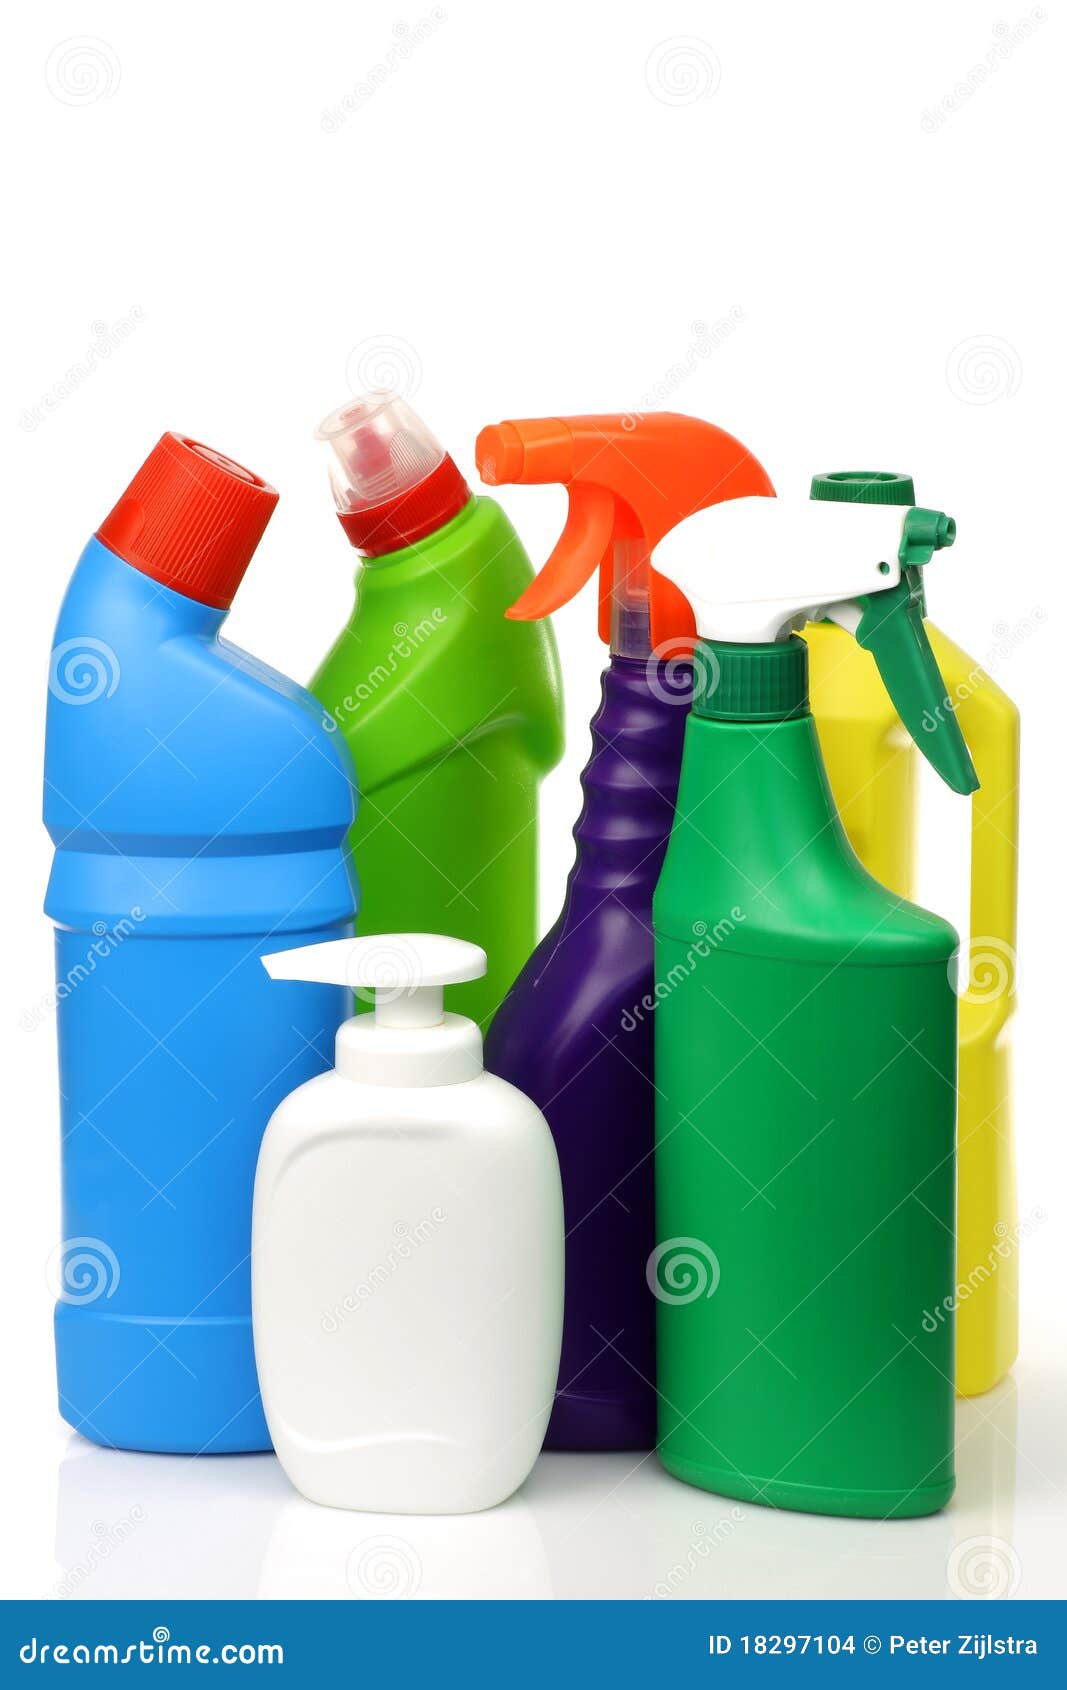 plastic cleaning bottles in various colors